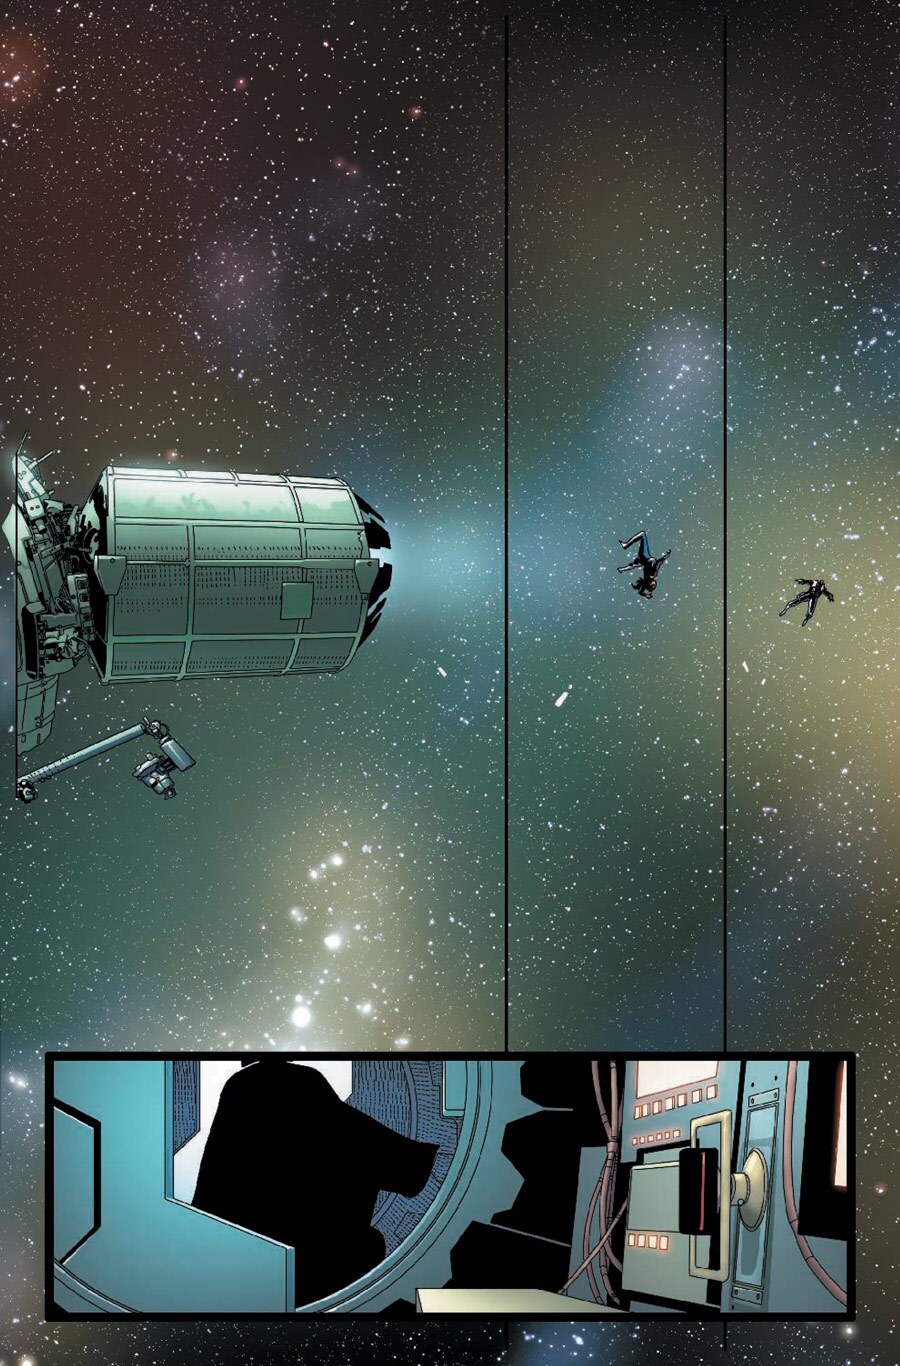 In a series of comic book panels, Dr. Aphra is shown floating in space after being thrown out through an airlock by Darth Vader who looks on.